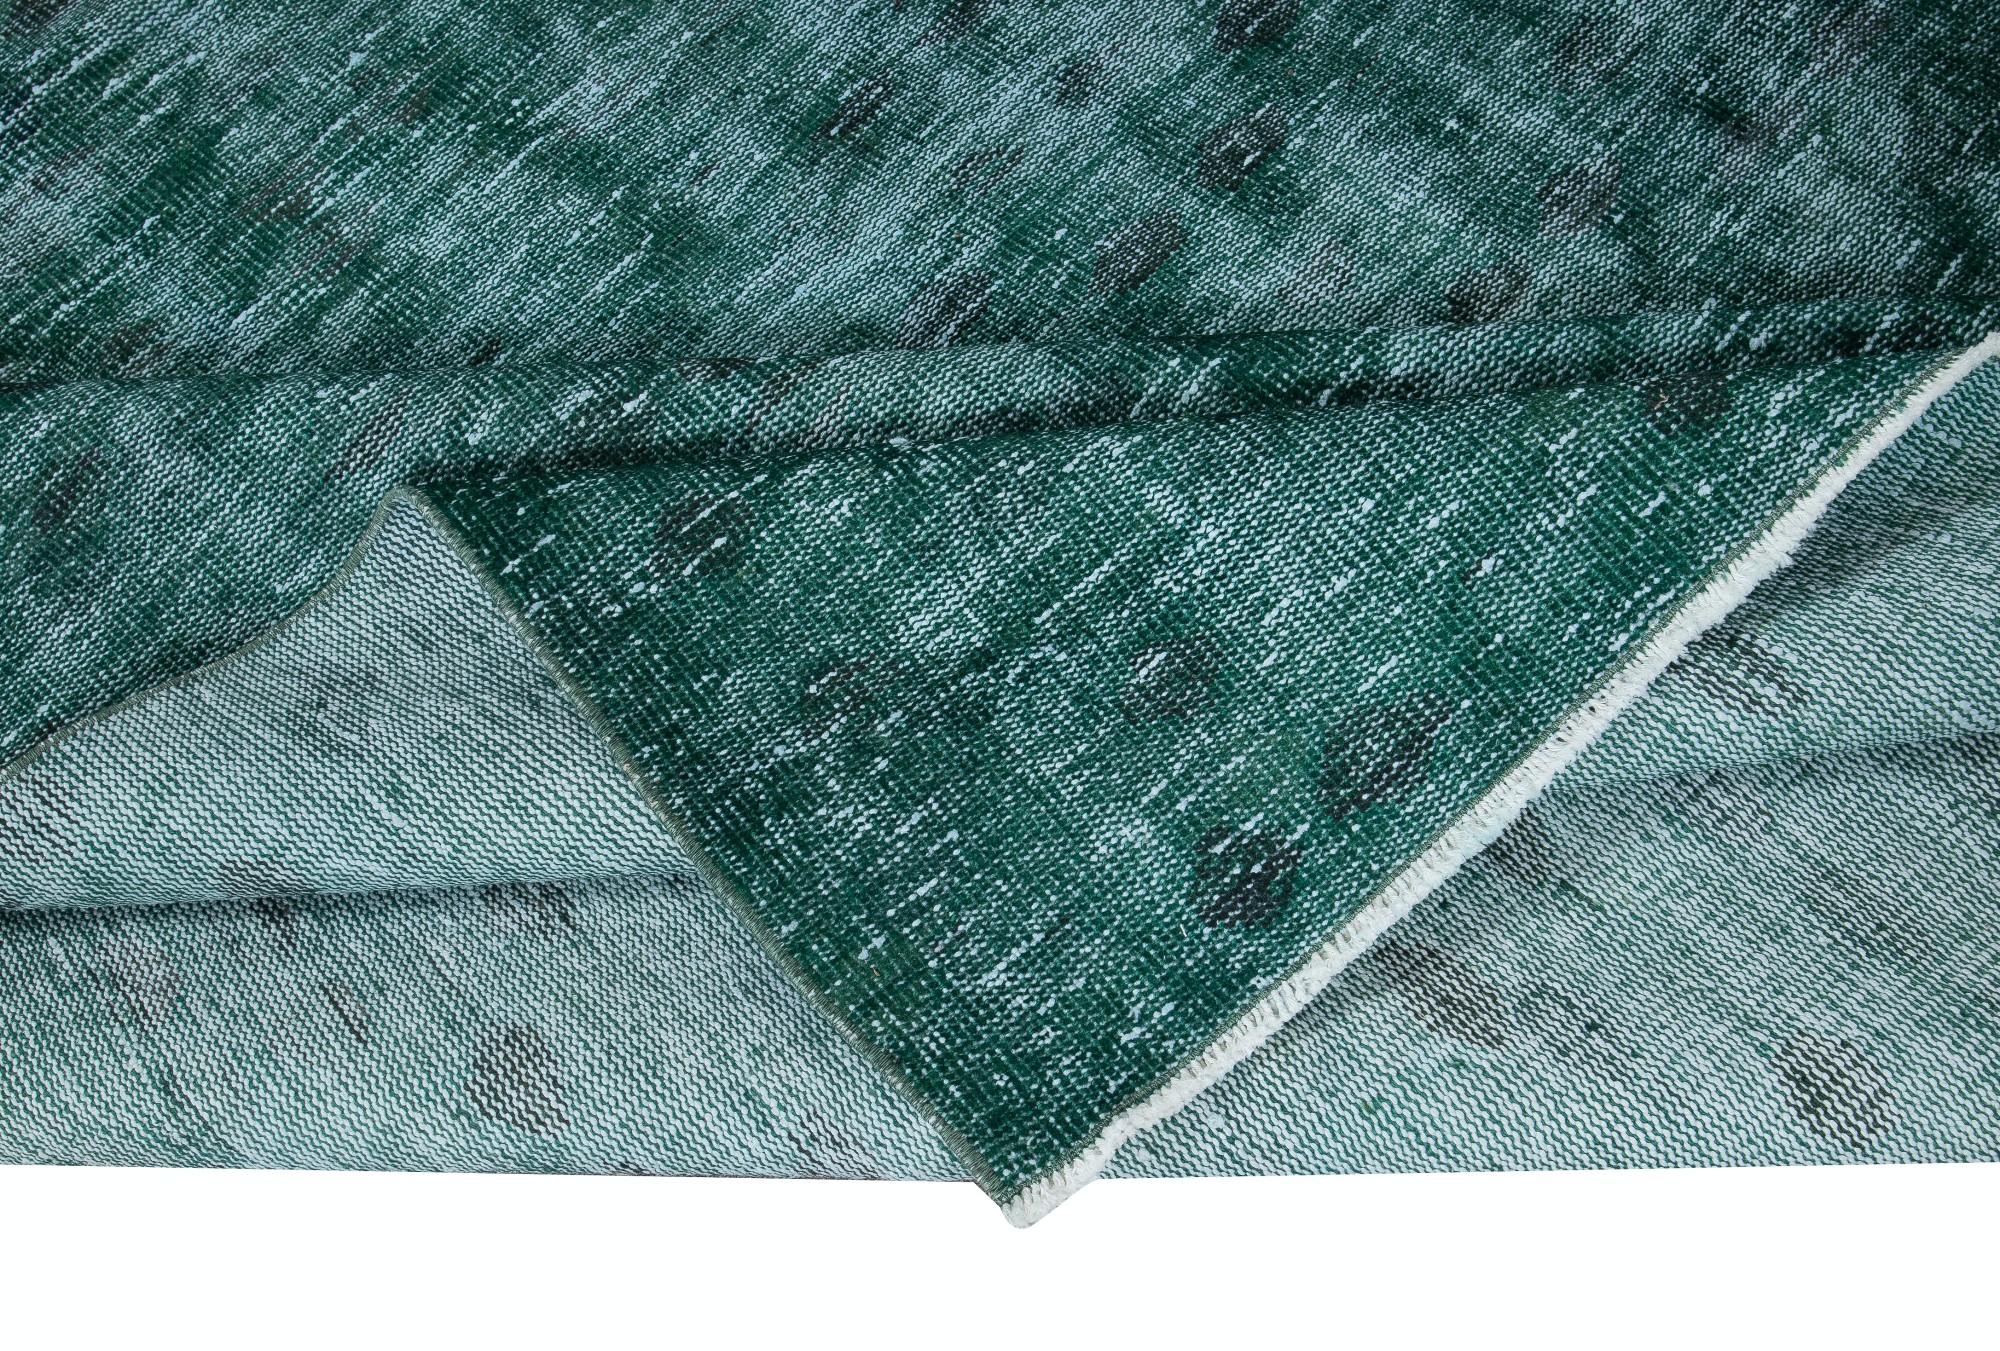 Modern 6x9.2 Ft Hand-Made Turkish Area Rug in Green, Contemporary Wool Upcycled Carpet For Sale